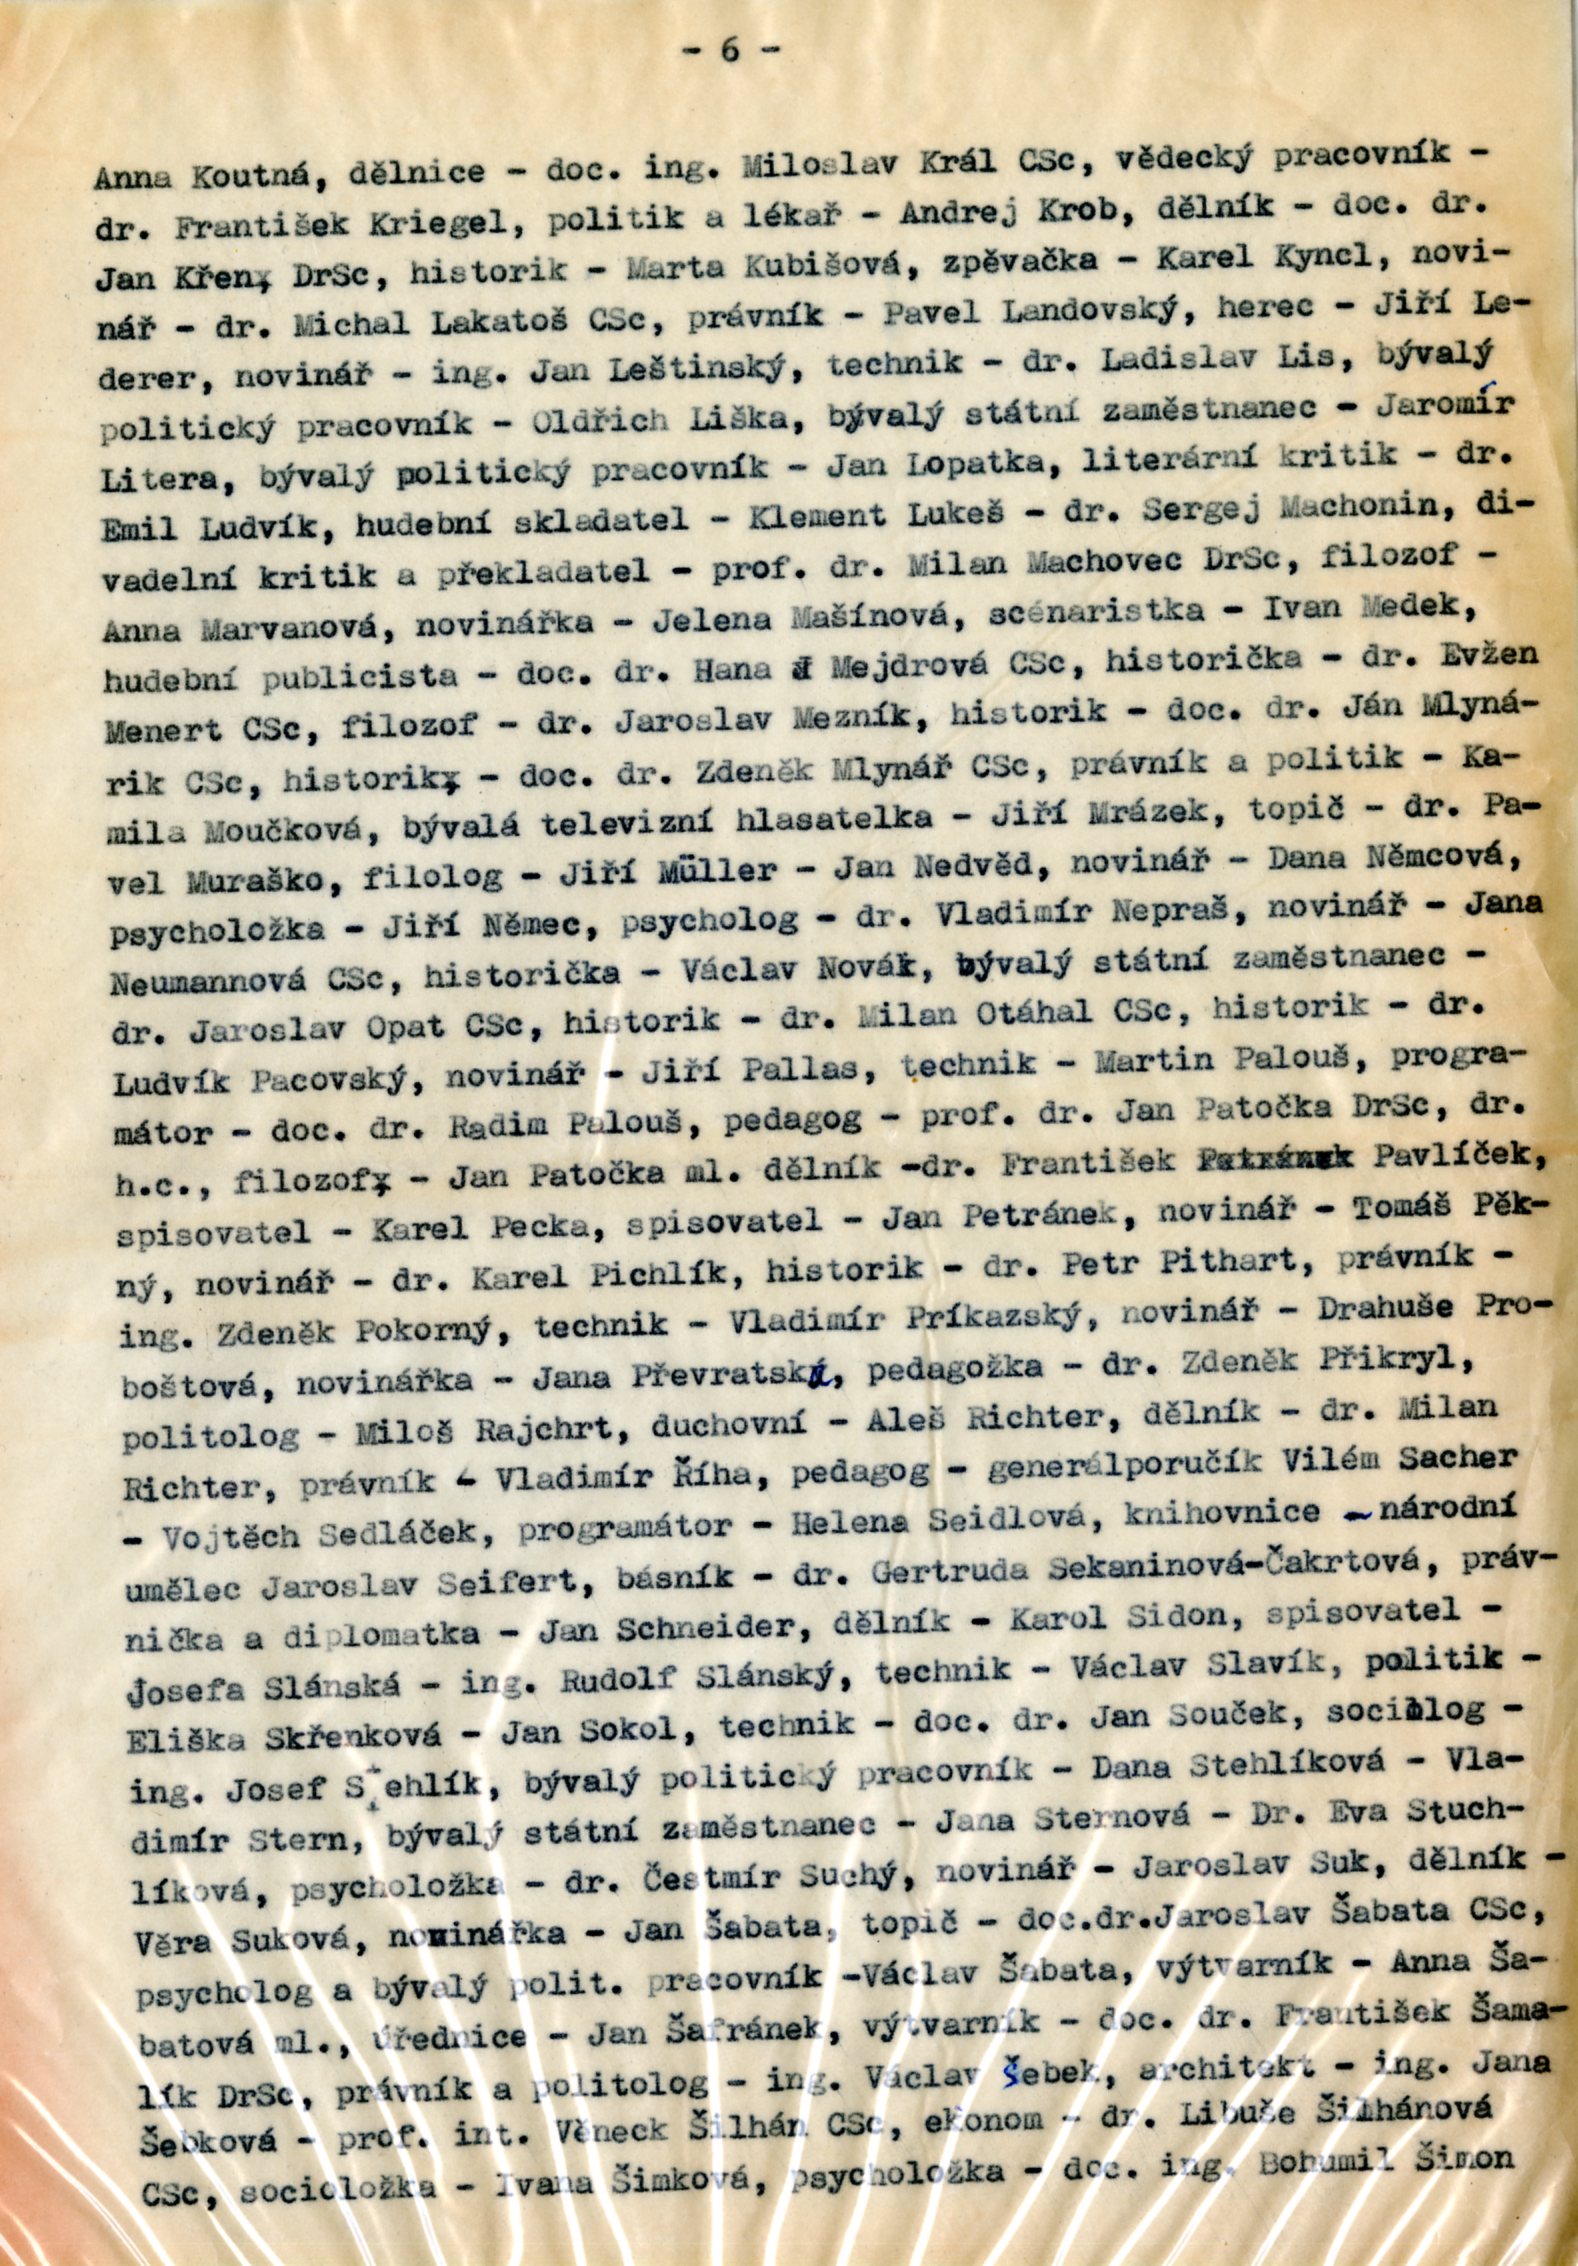 Sixth page of Charter 77